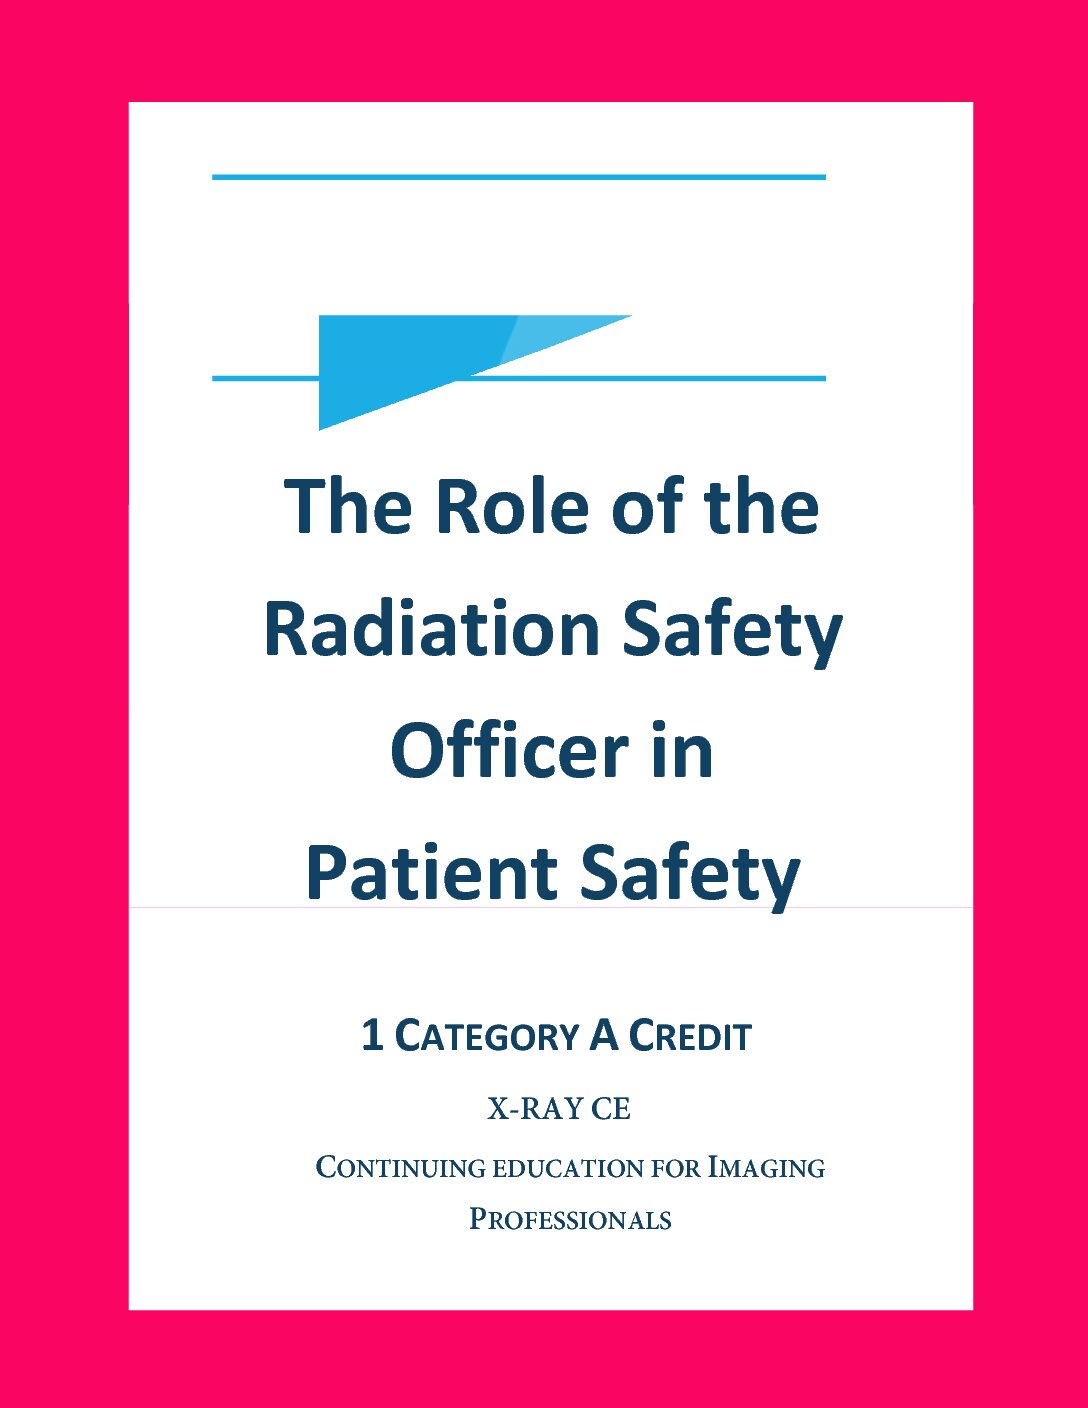 Radiation Protection - Get Your CEU - 3.5 Category A CE, $12.50